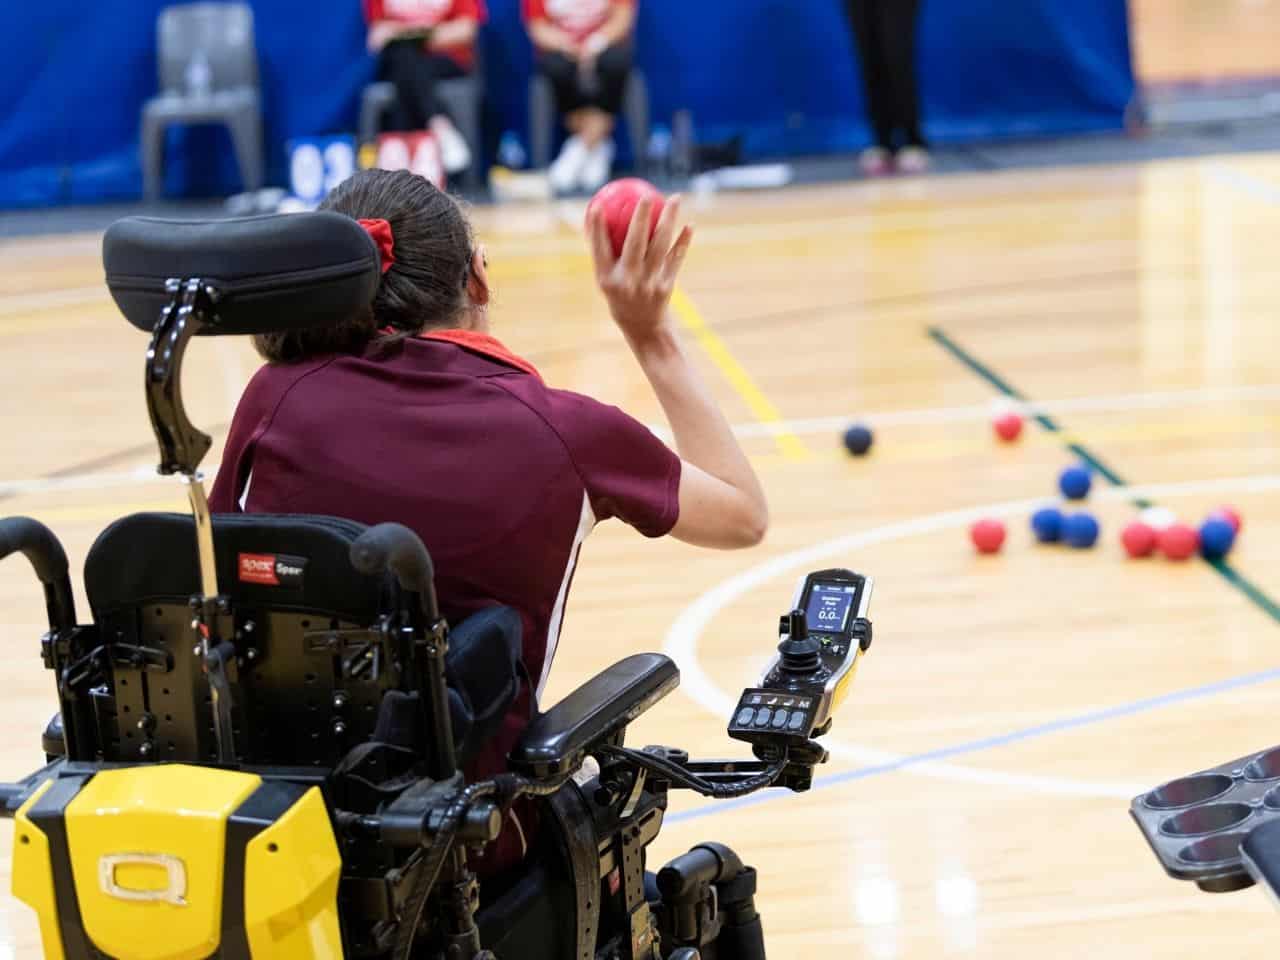 A female athlete sitting in her wheelchair throws a ball during a game of Boccia.